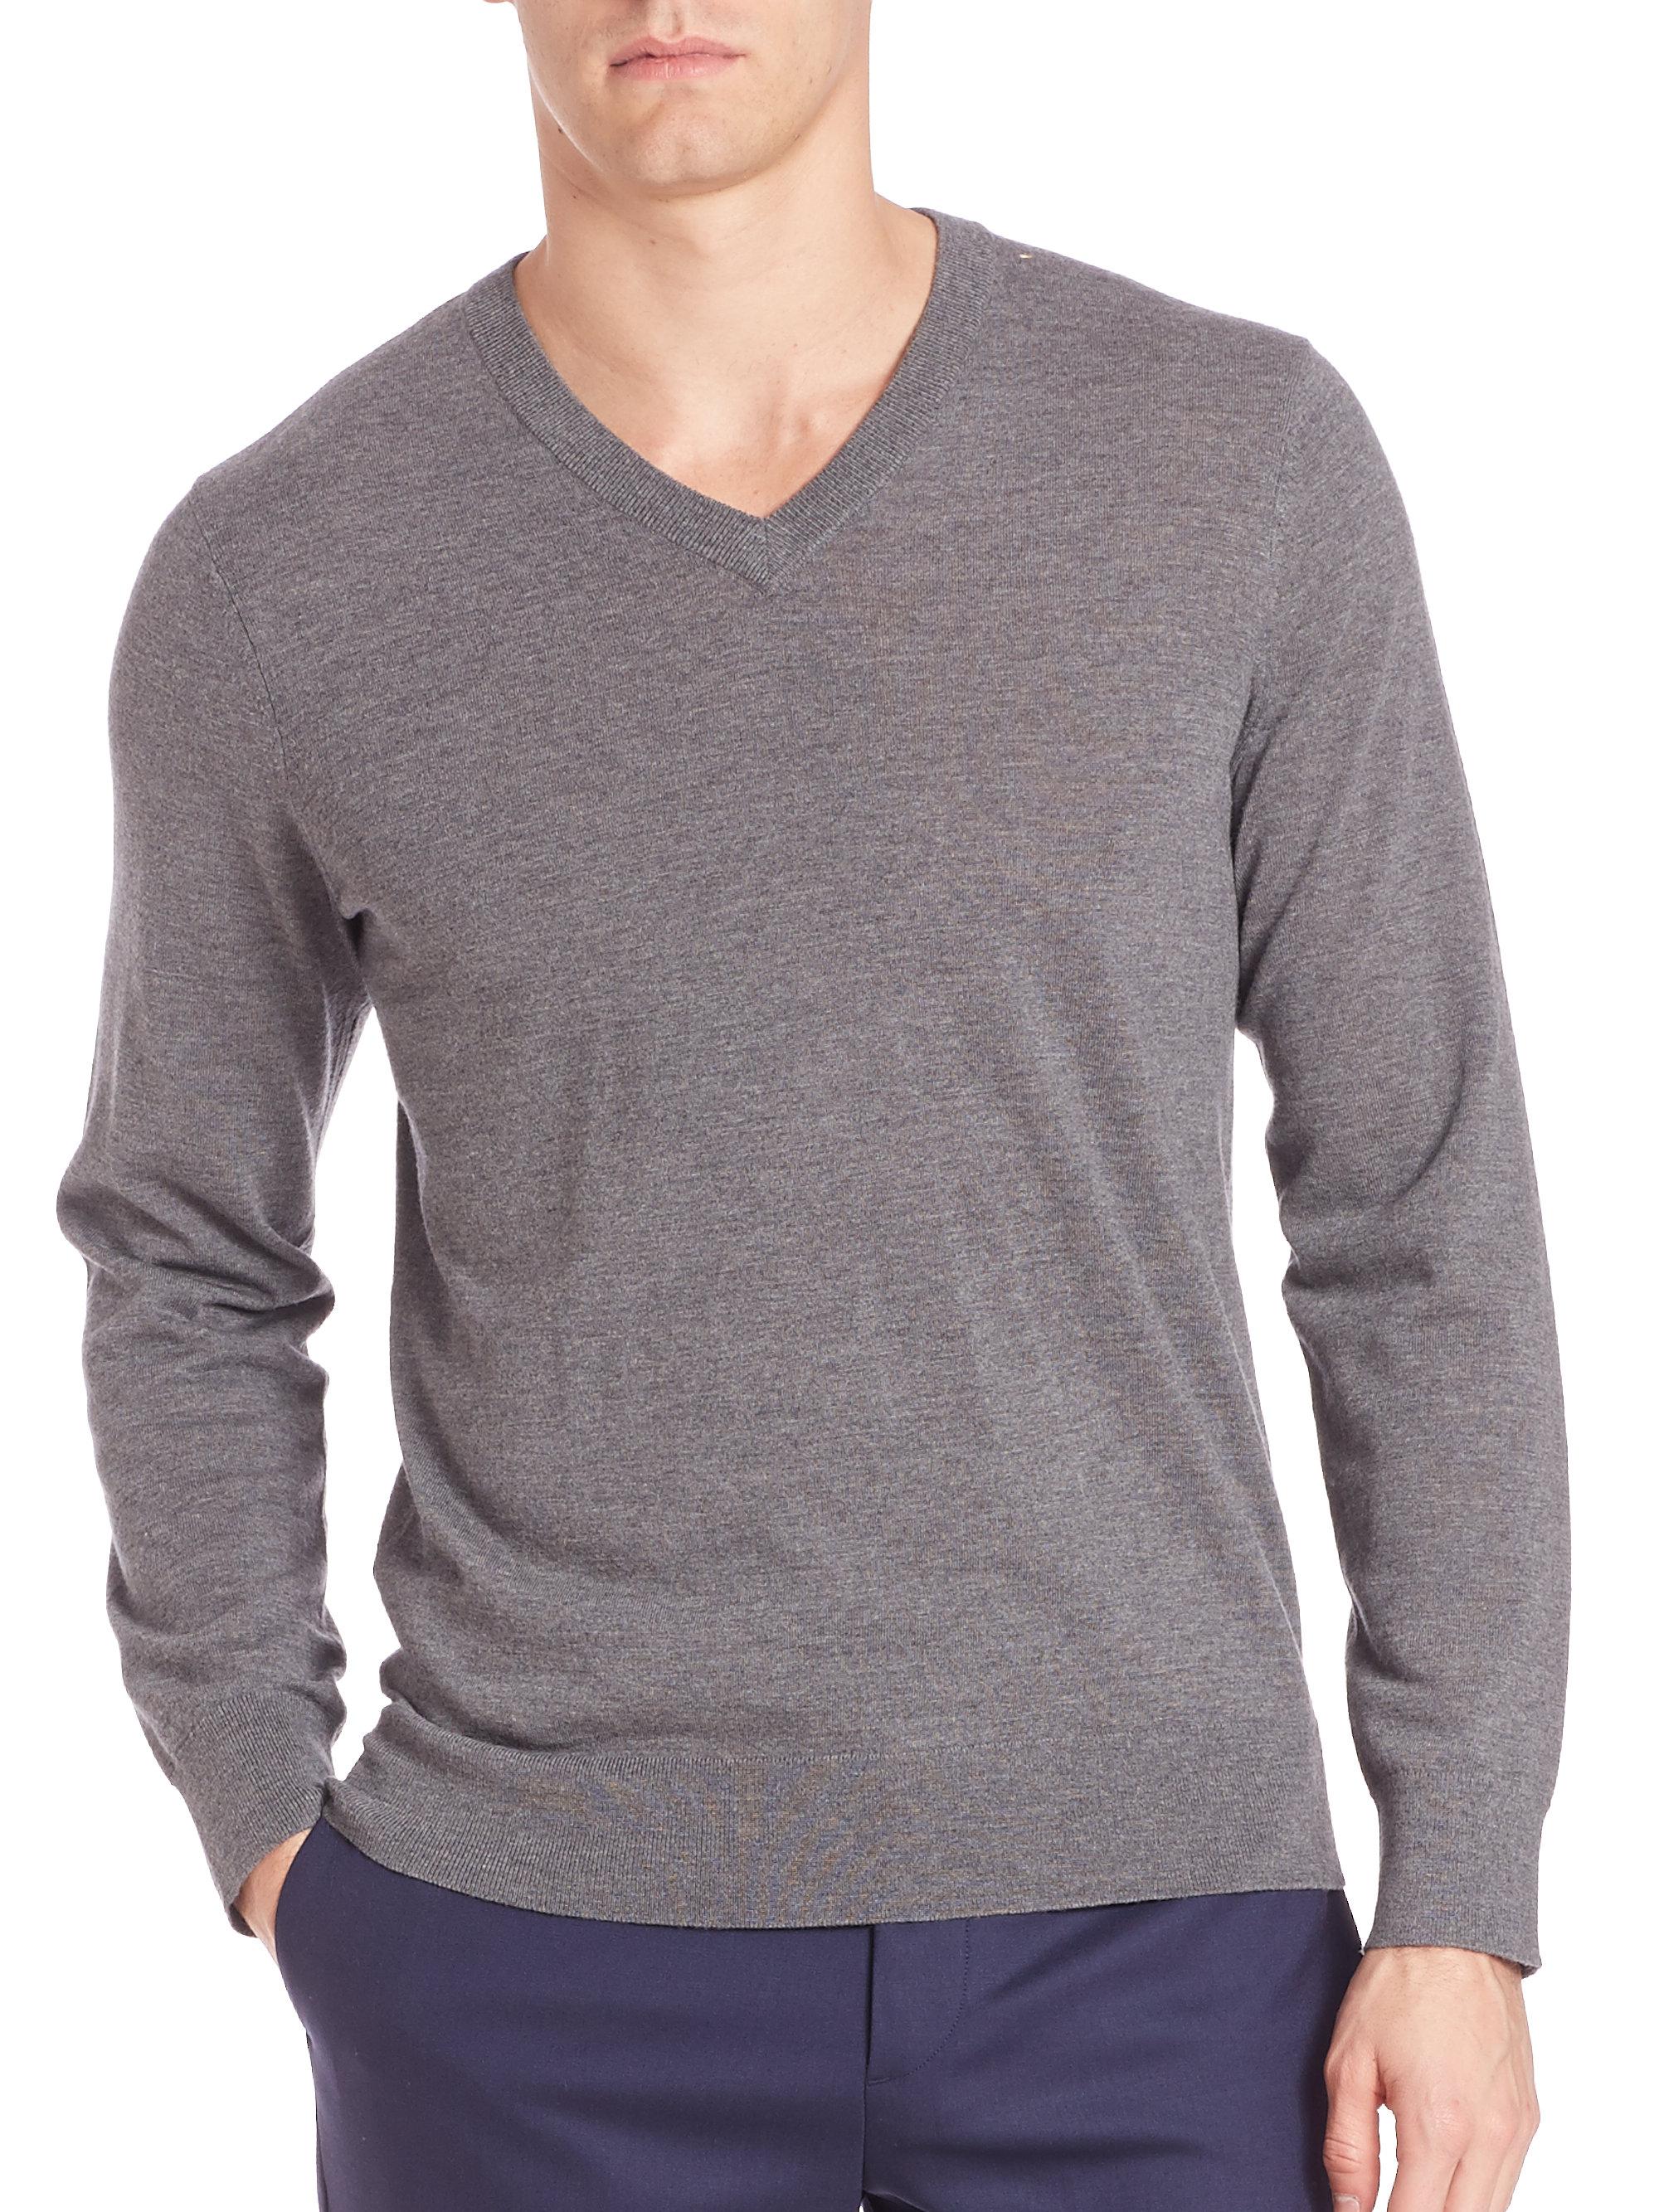 Theory Wool V-neck Sweater in Grey (Gray) for Men - Lyst